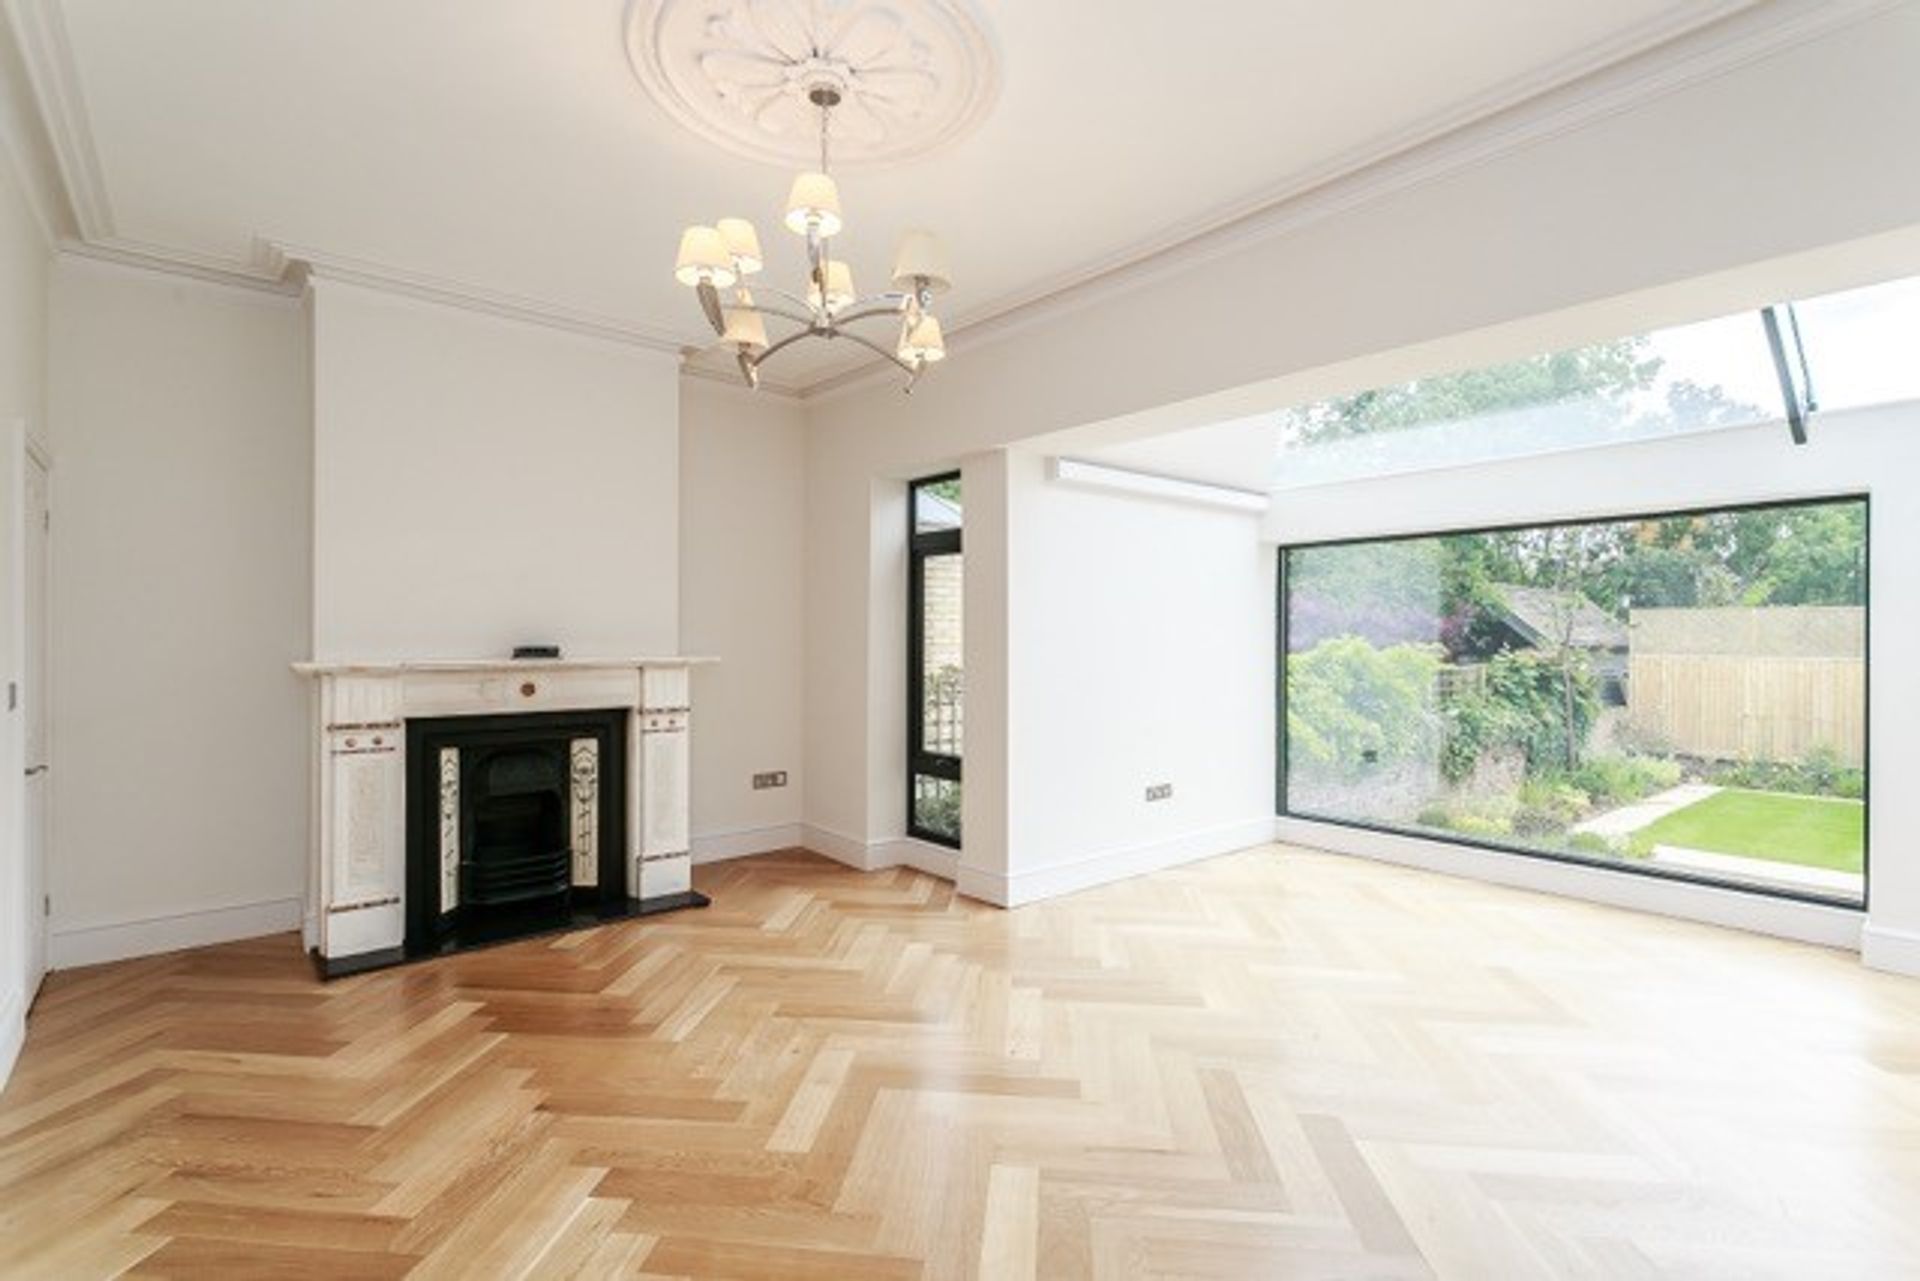 Living room with large picture window and Parque wood floor